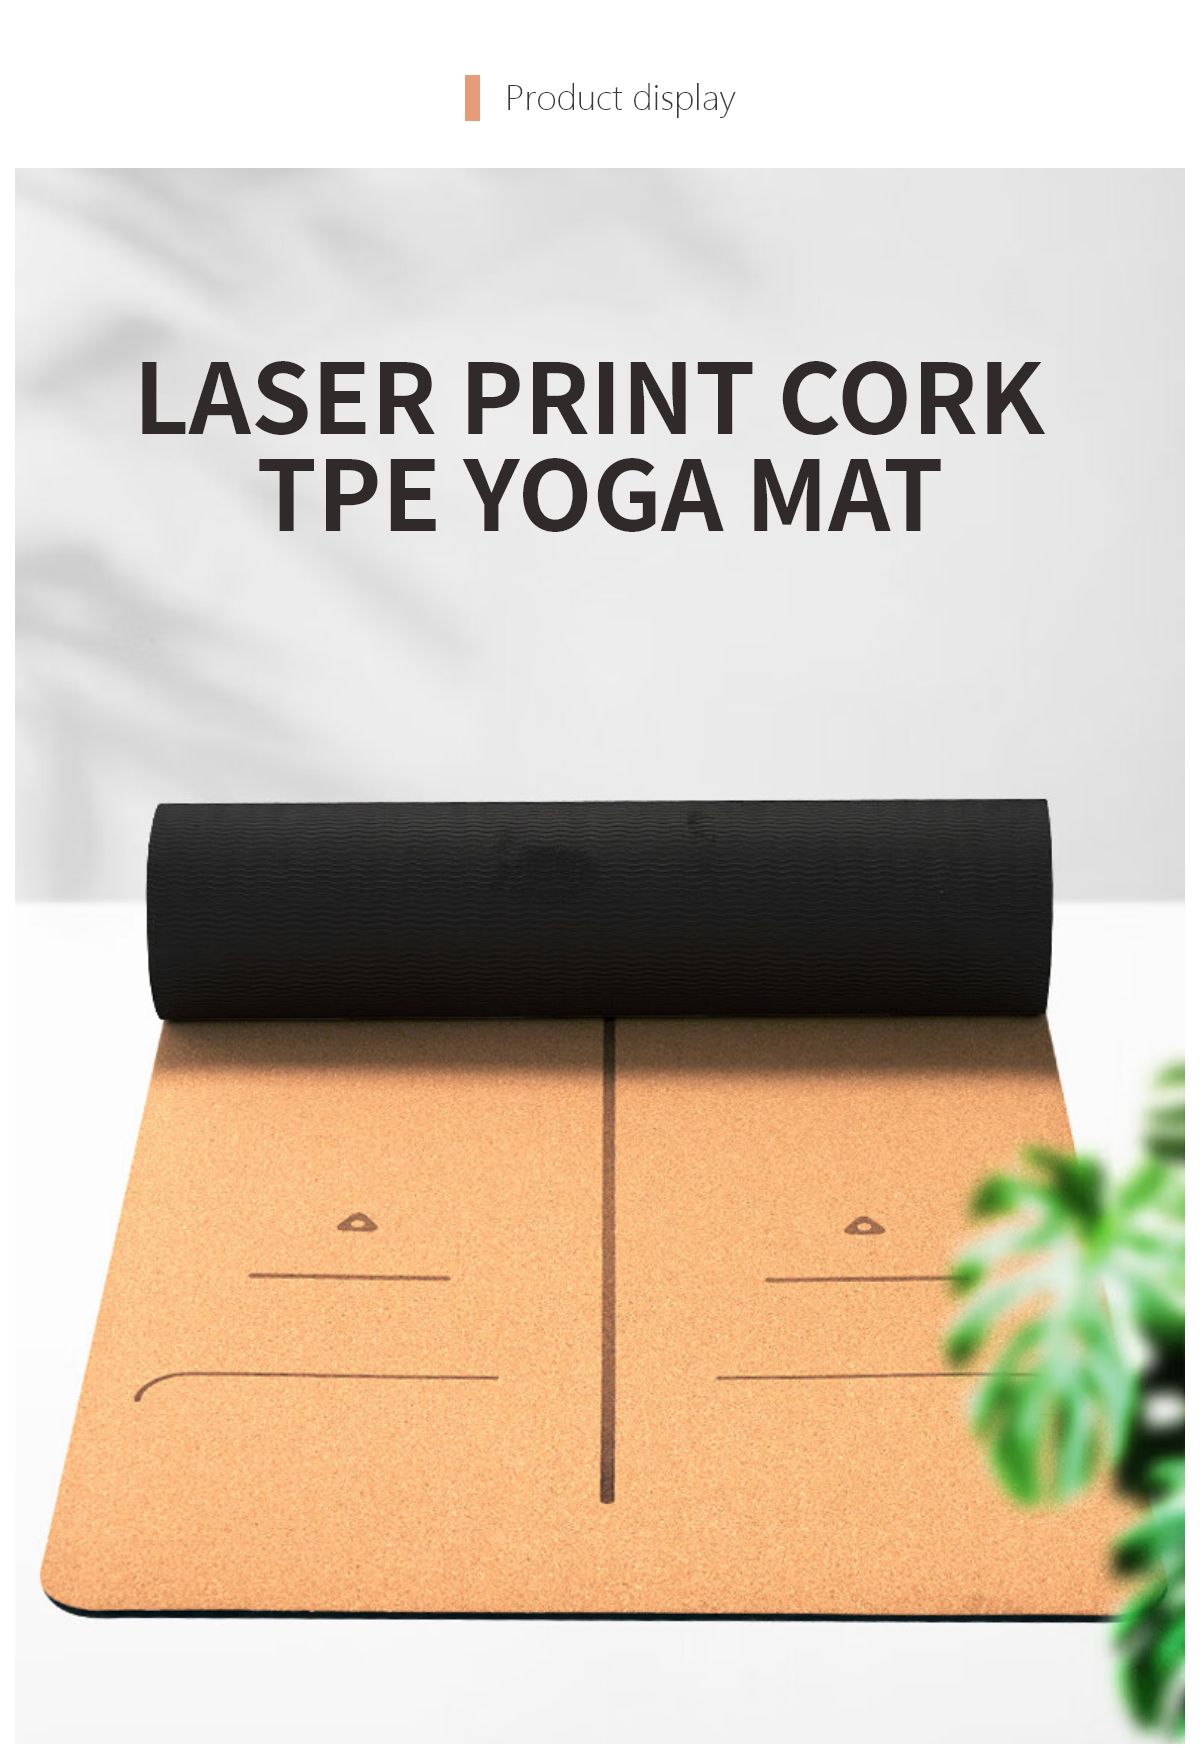 Wholesale Cork TPE Yoga Mat With Laser Alignment Lines